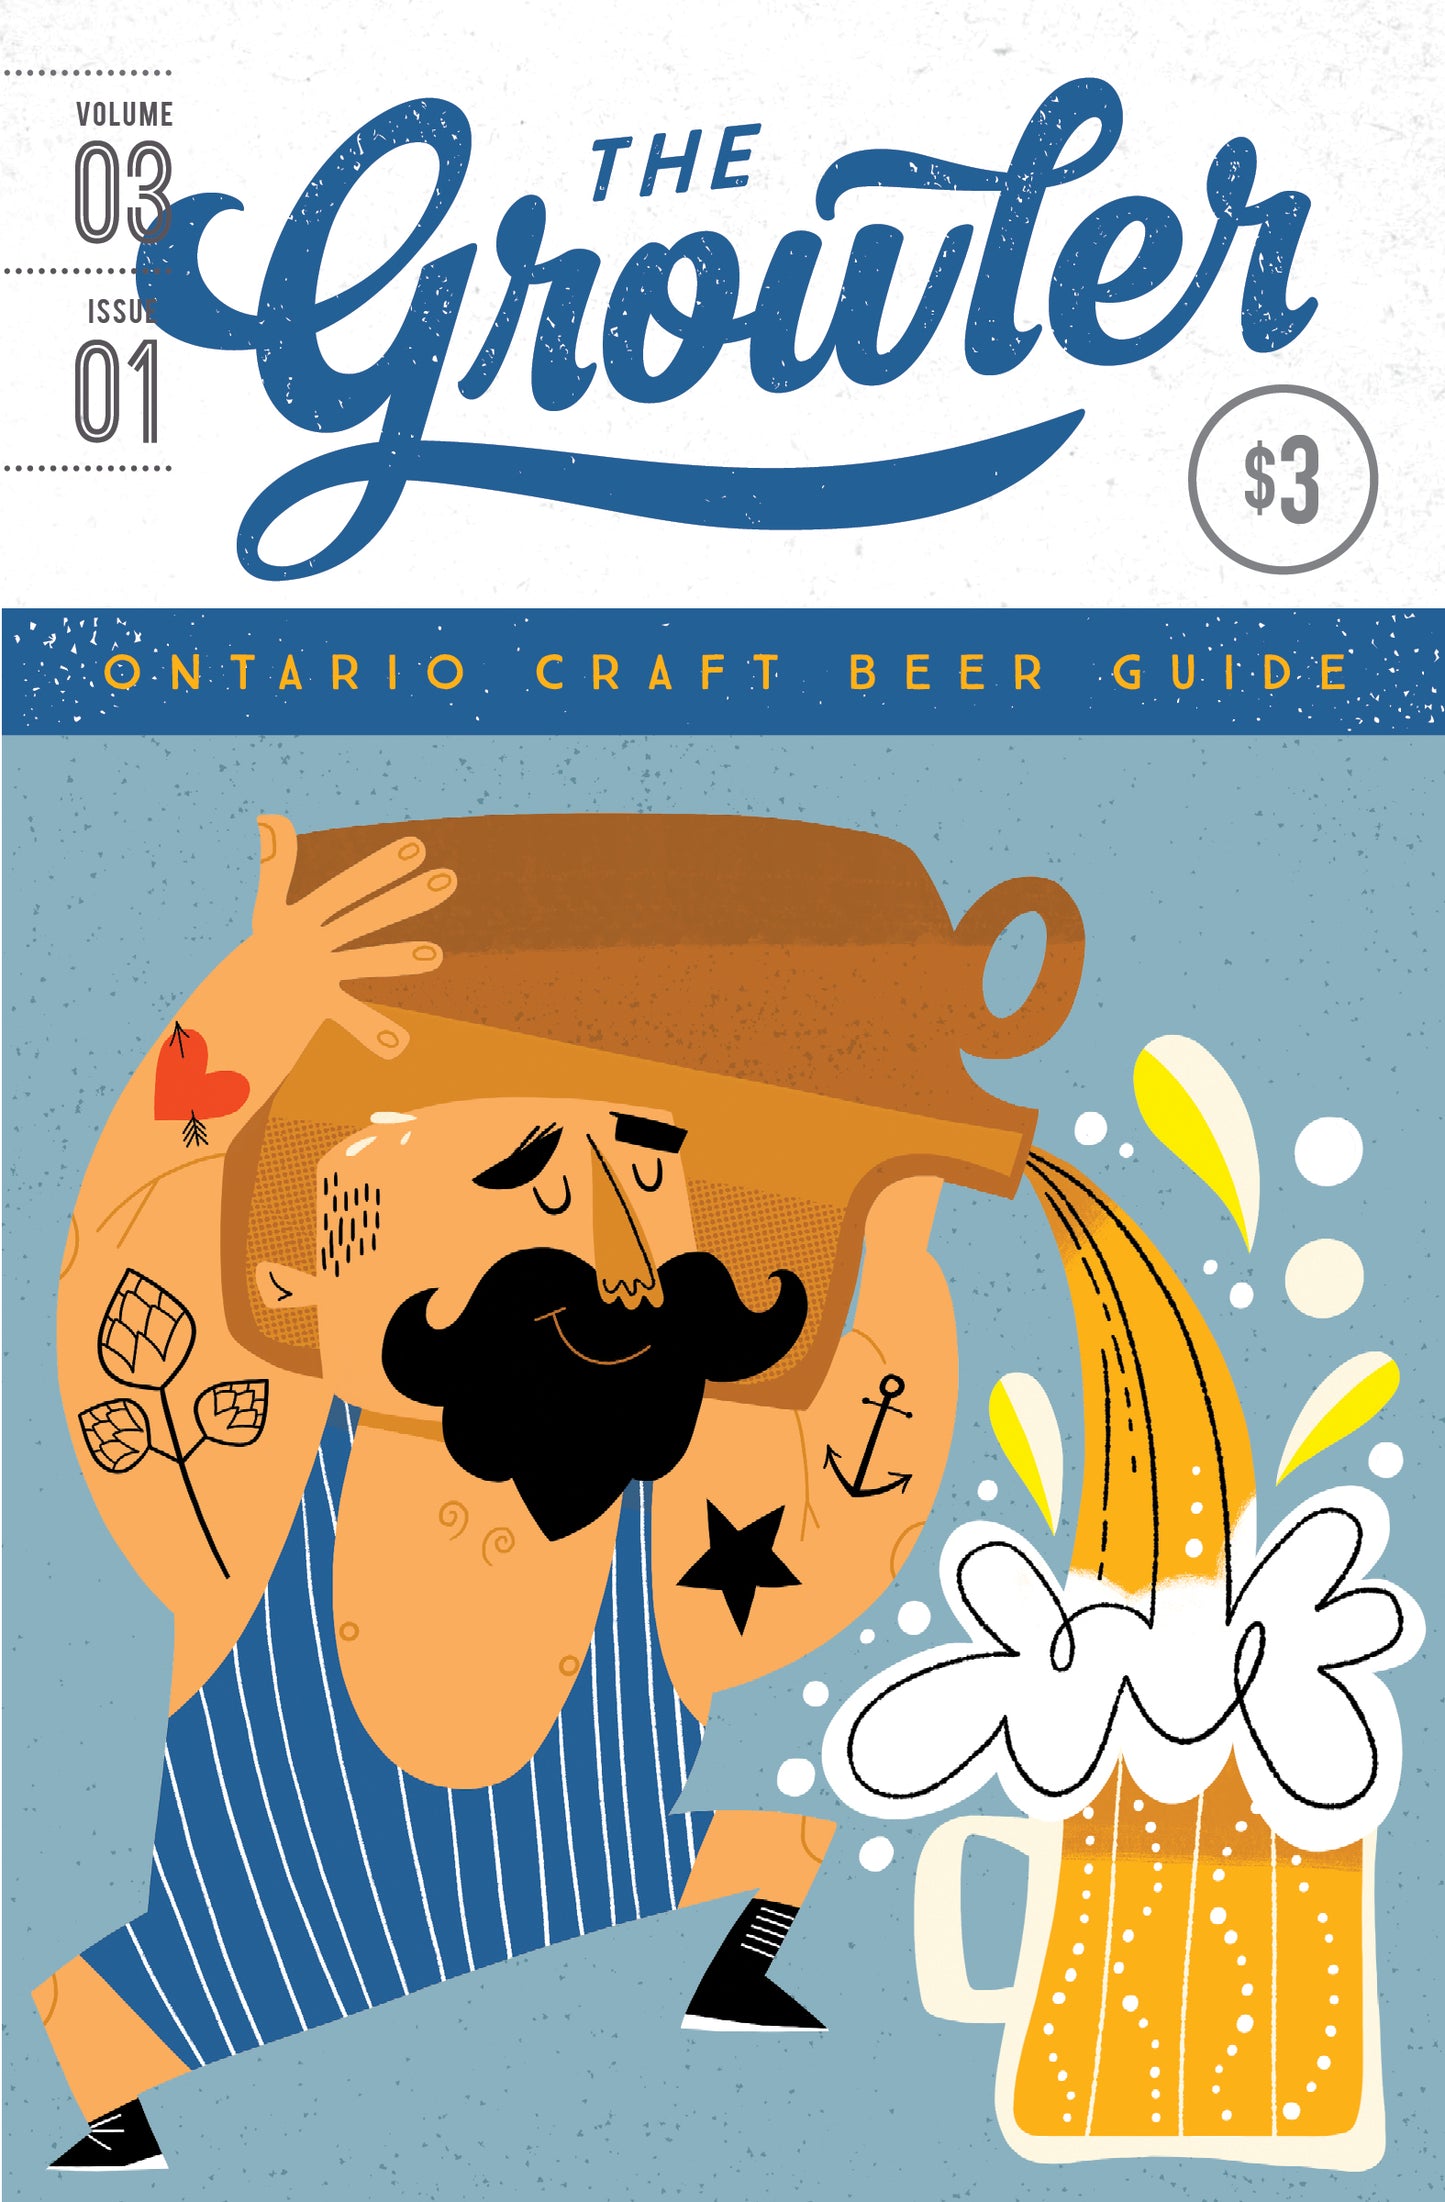 The Growler Ontario Volume 3, Issue 1 (Spring 2020)